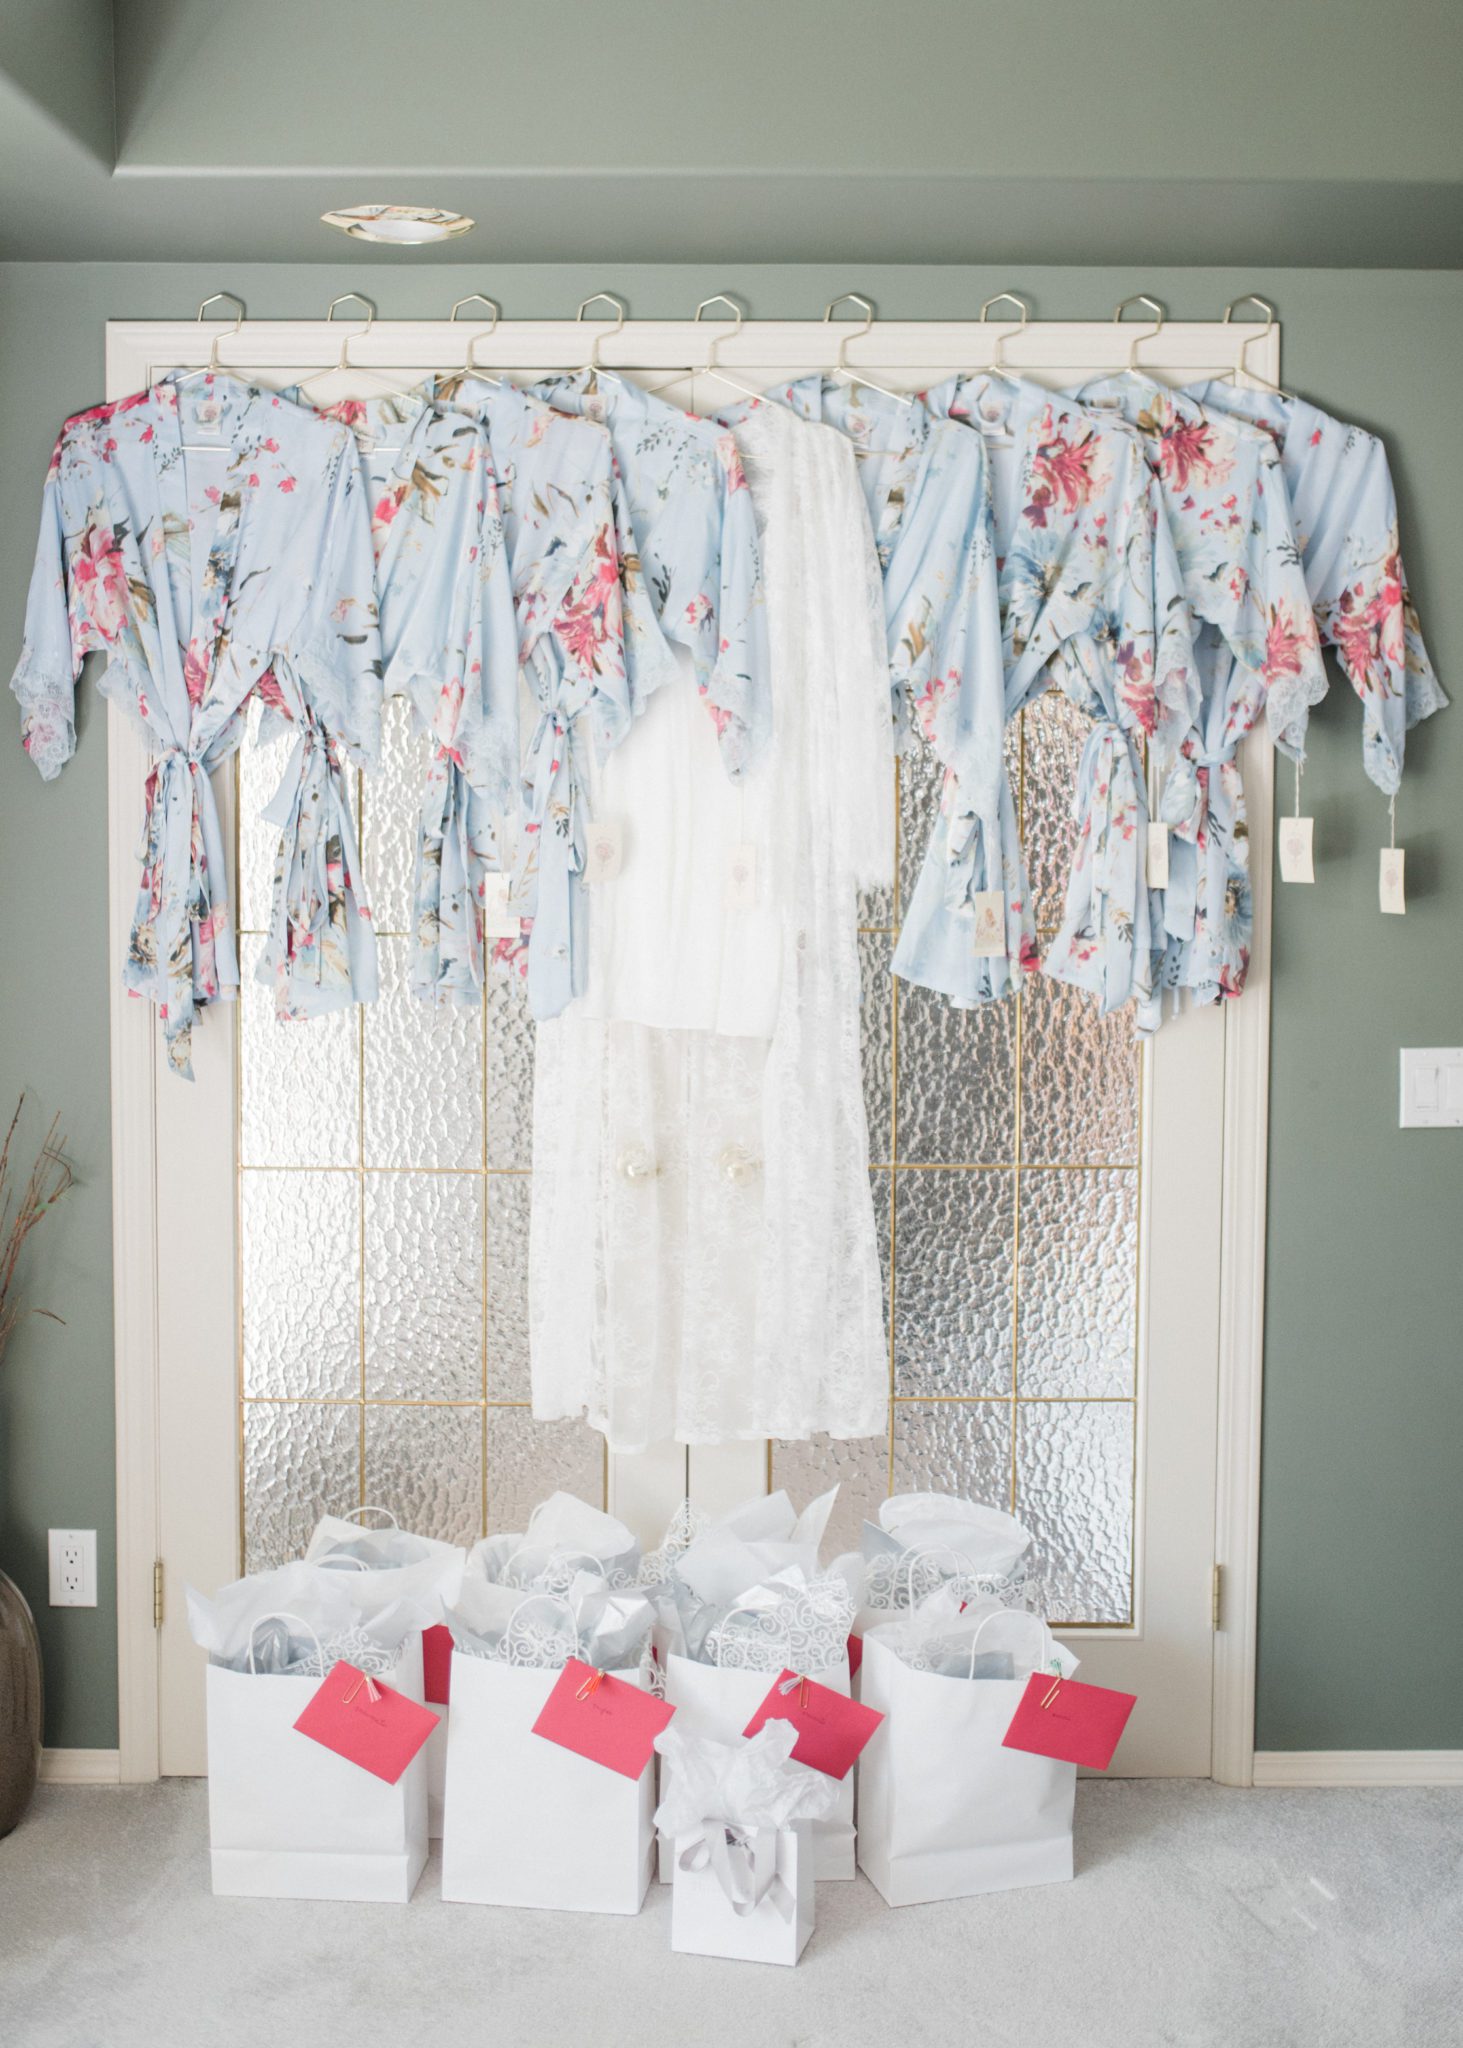 Pale blue and pink bridesmaid robes